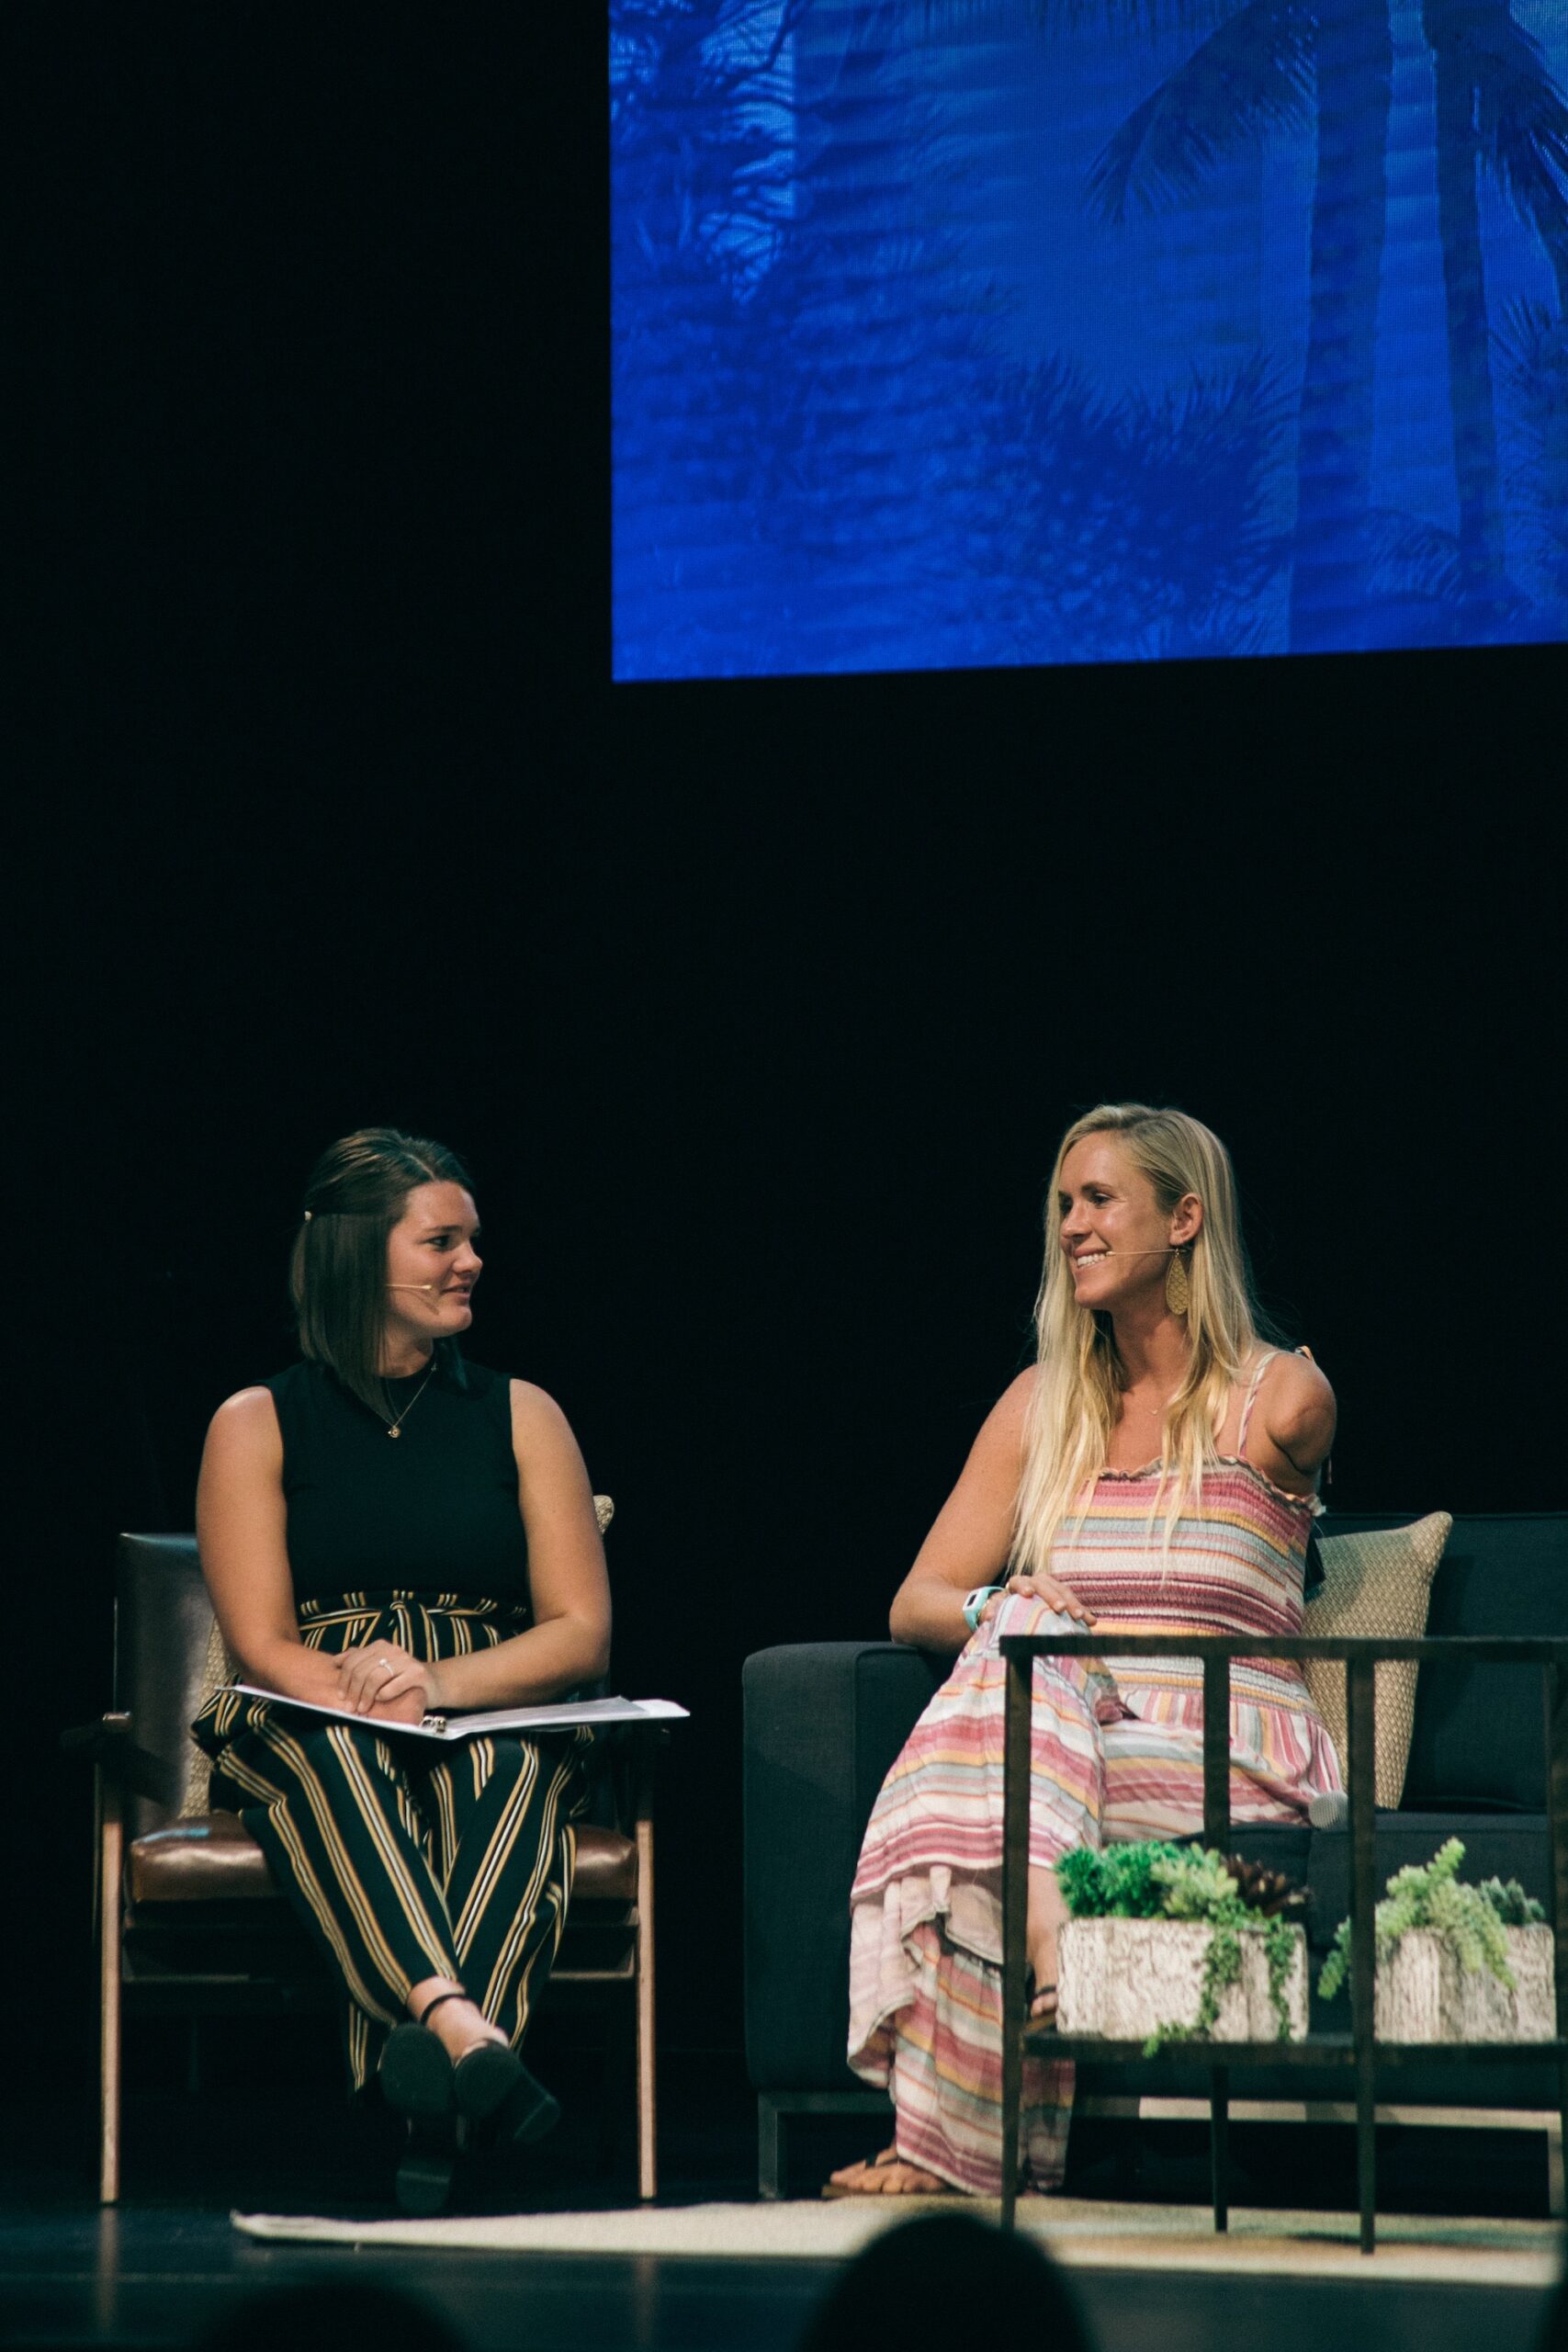 Carley and Bethany Hamilton on stage at Shine Forth